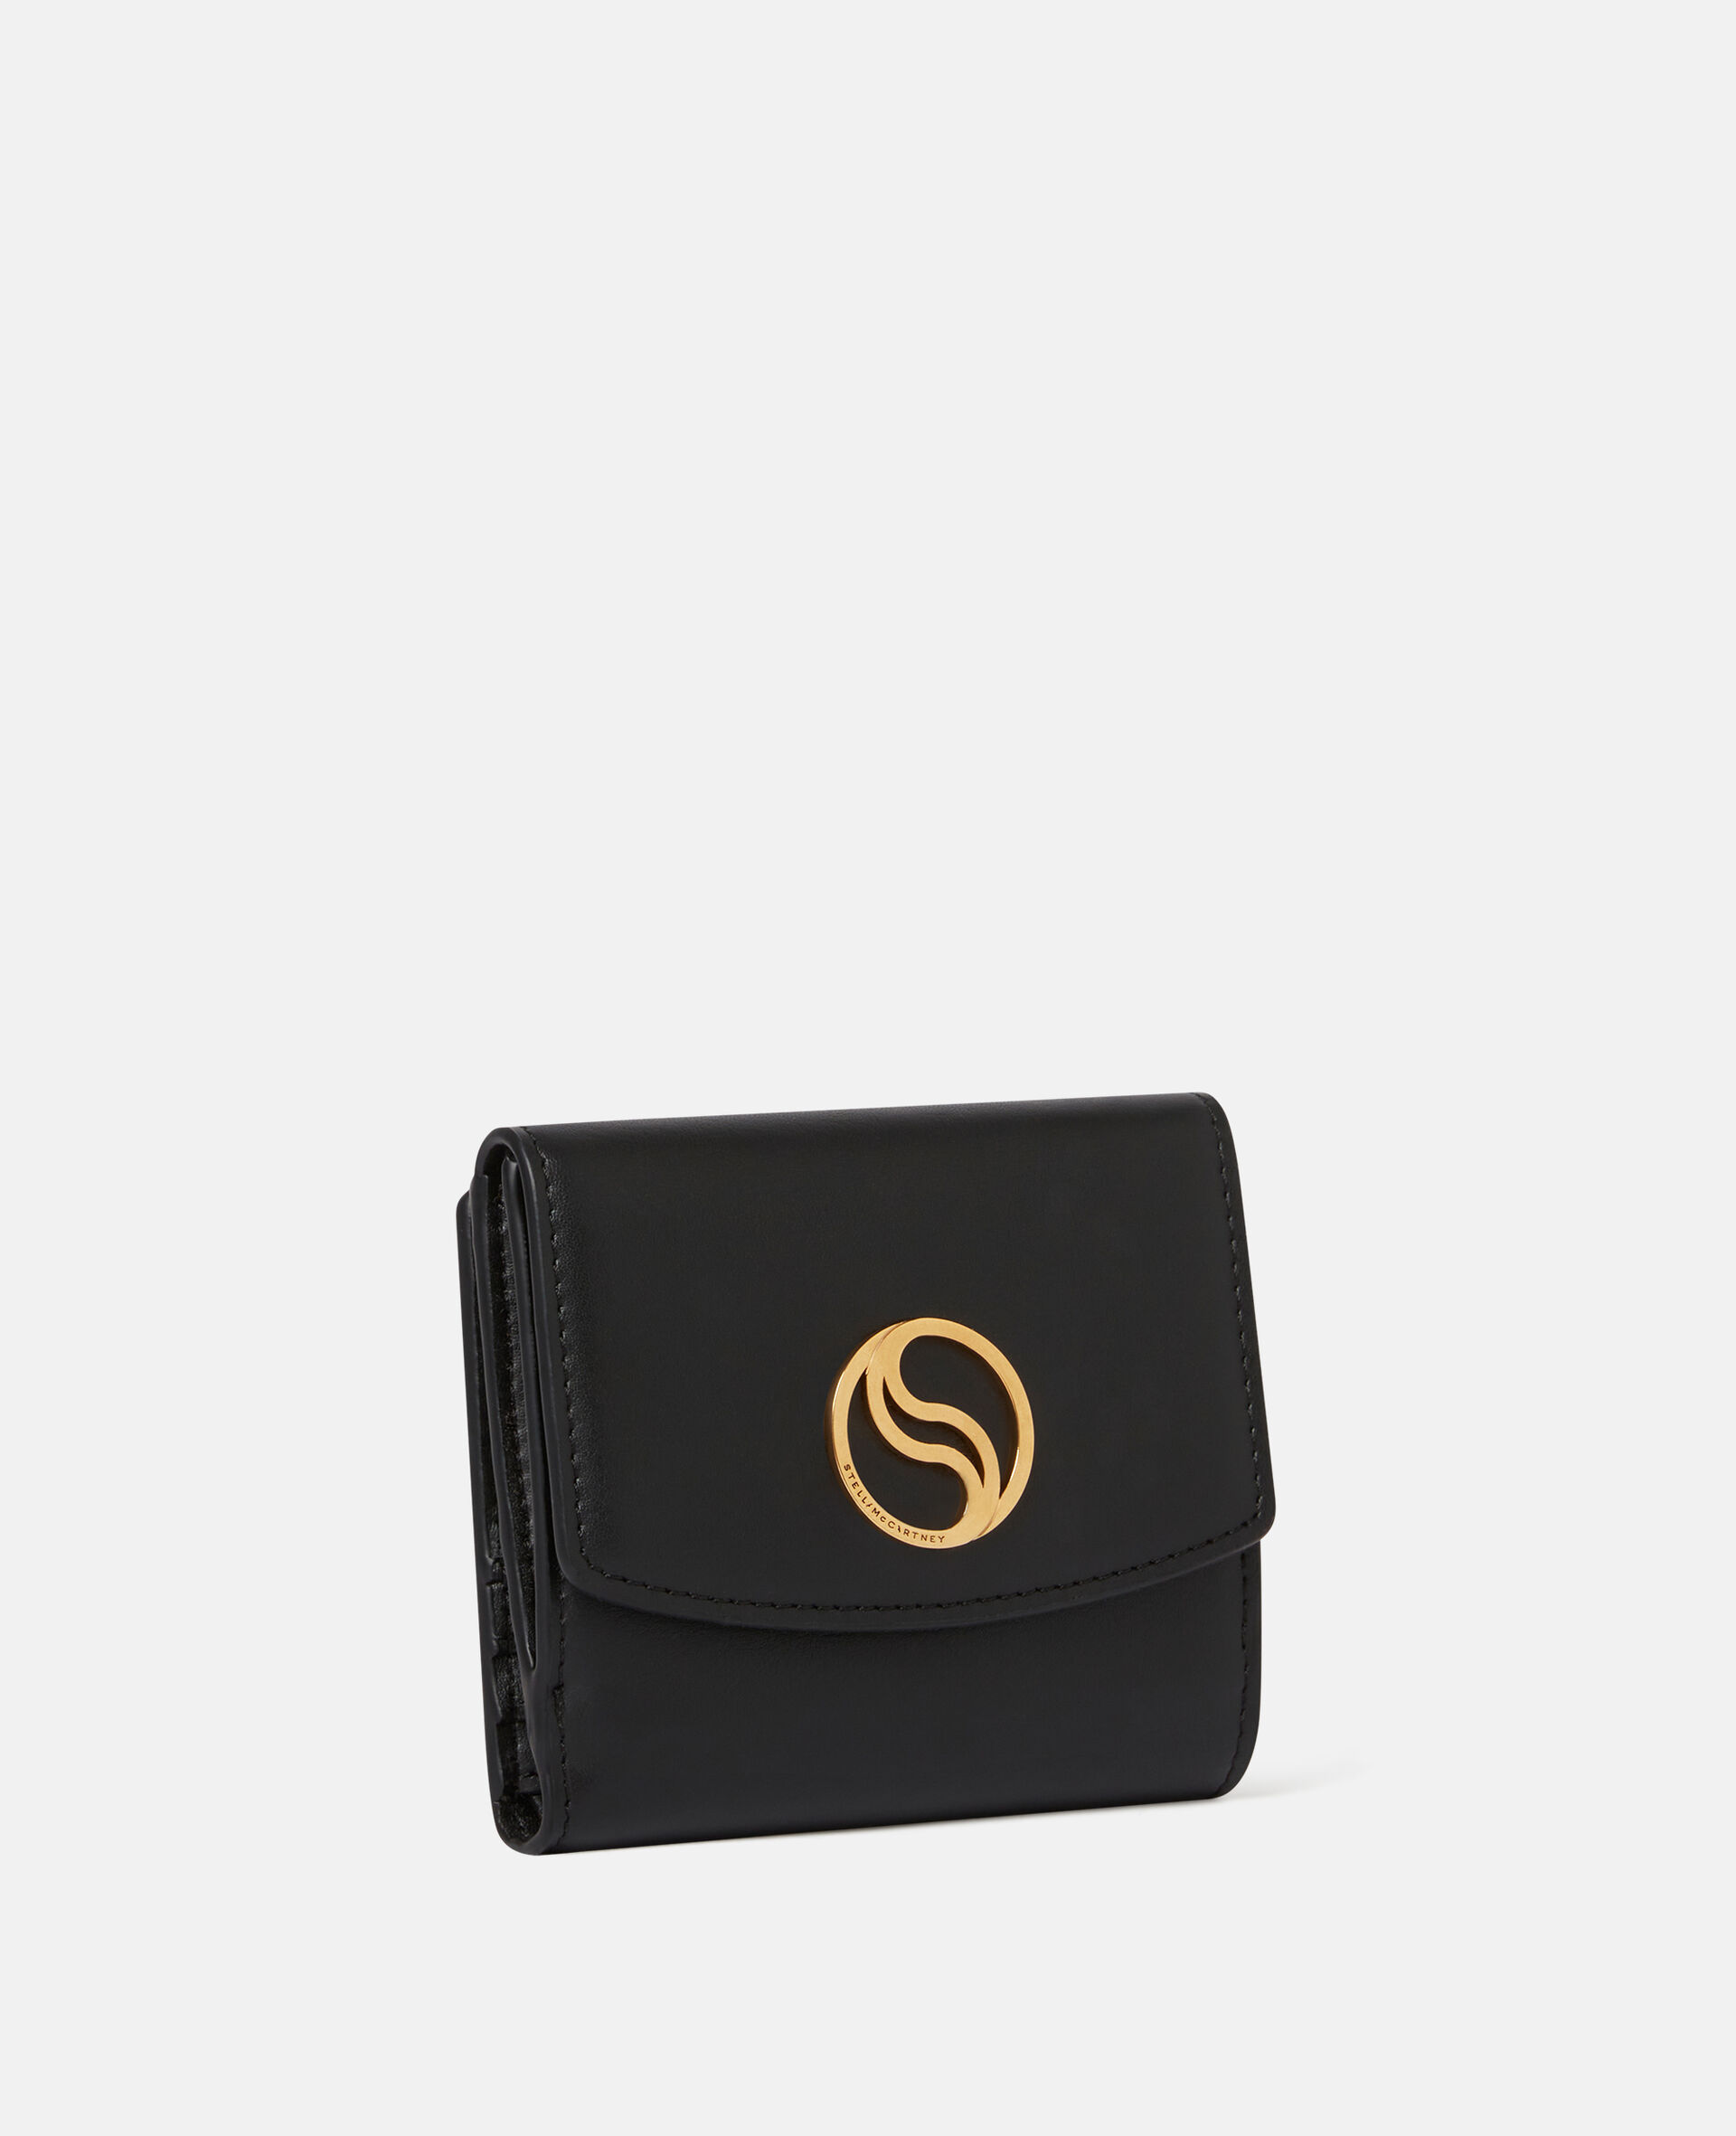 S-Wave Small Flap Wallet-Black-large image number 1